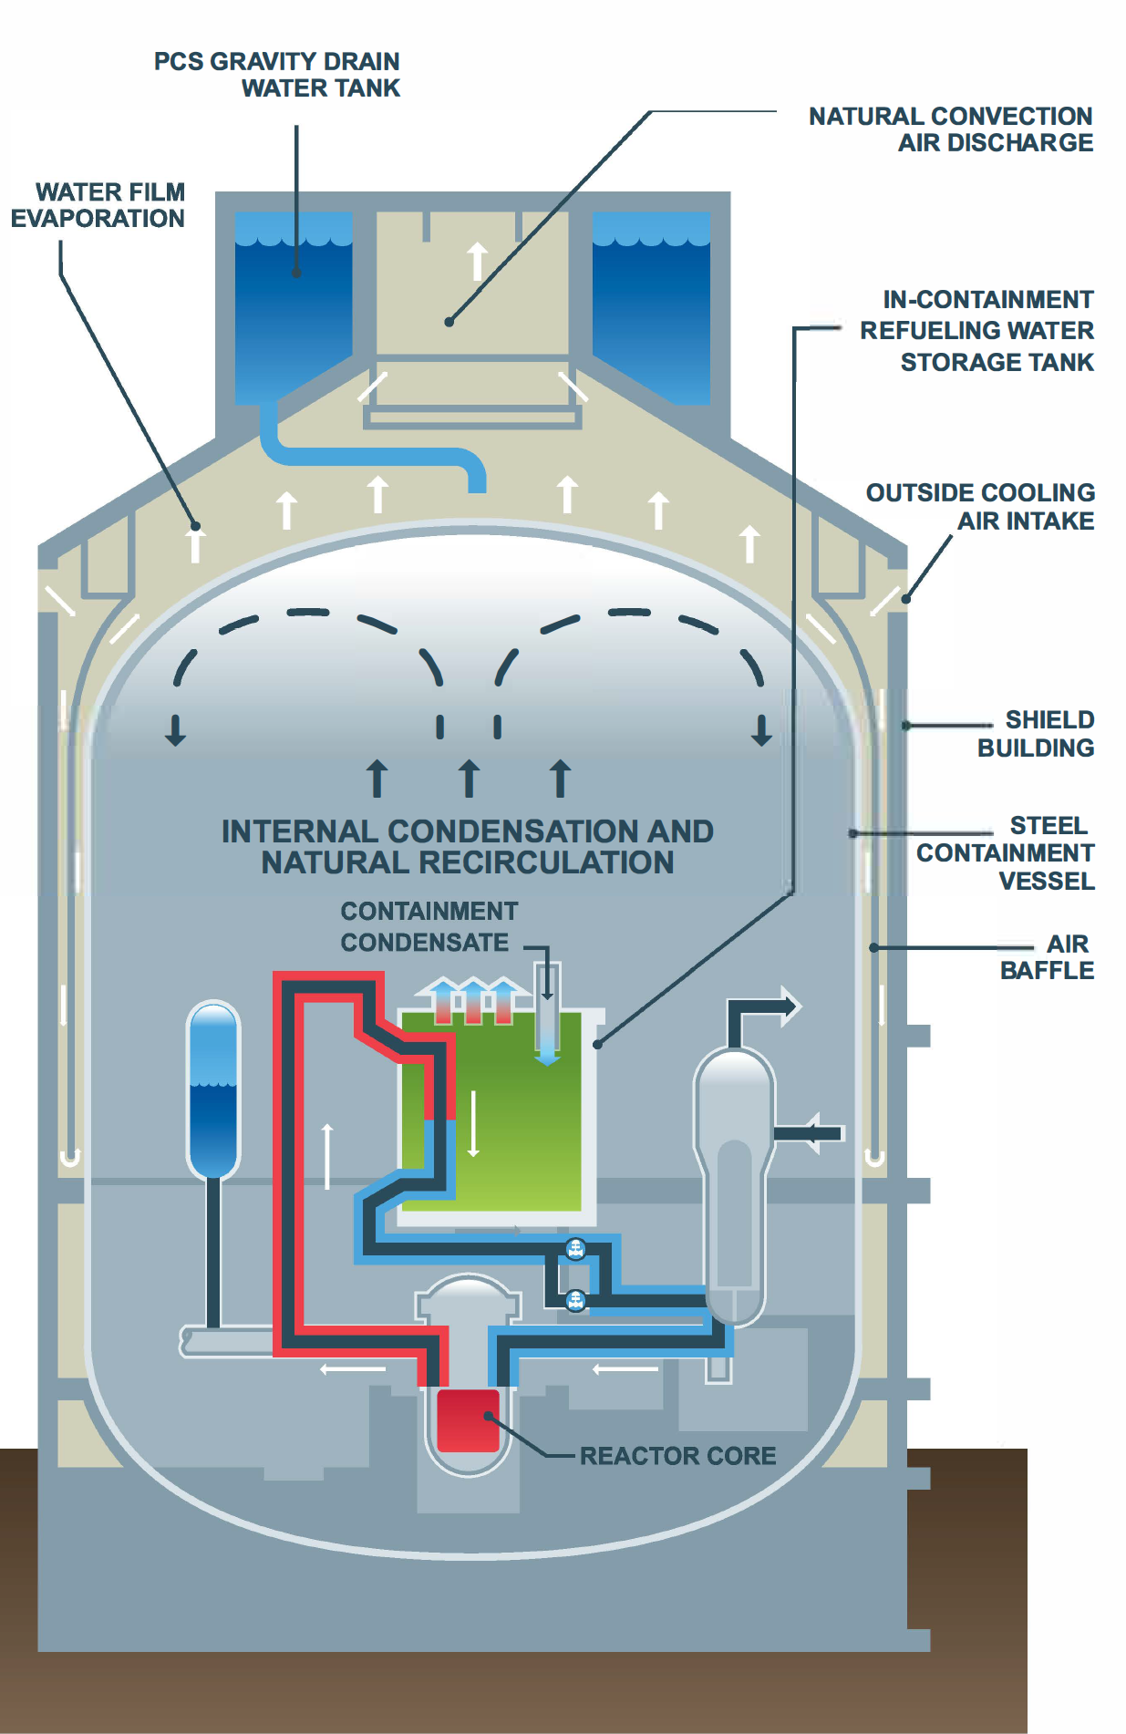 TRANSFER OF REACTOR DECAY HEAT TO OUTSIDE AIR